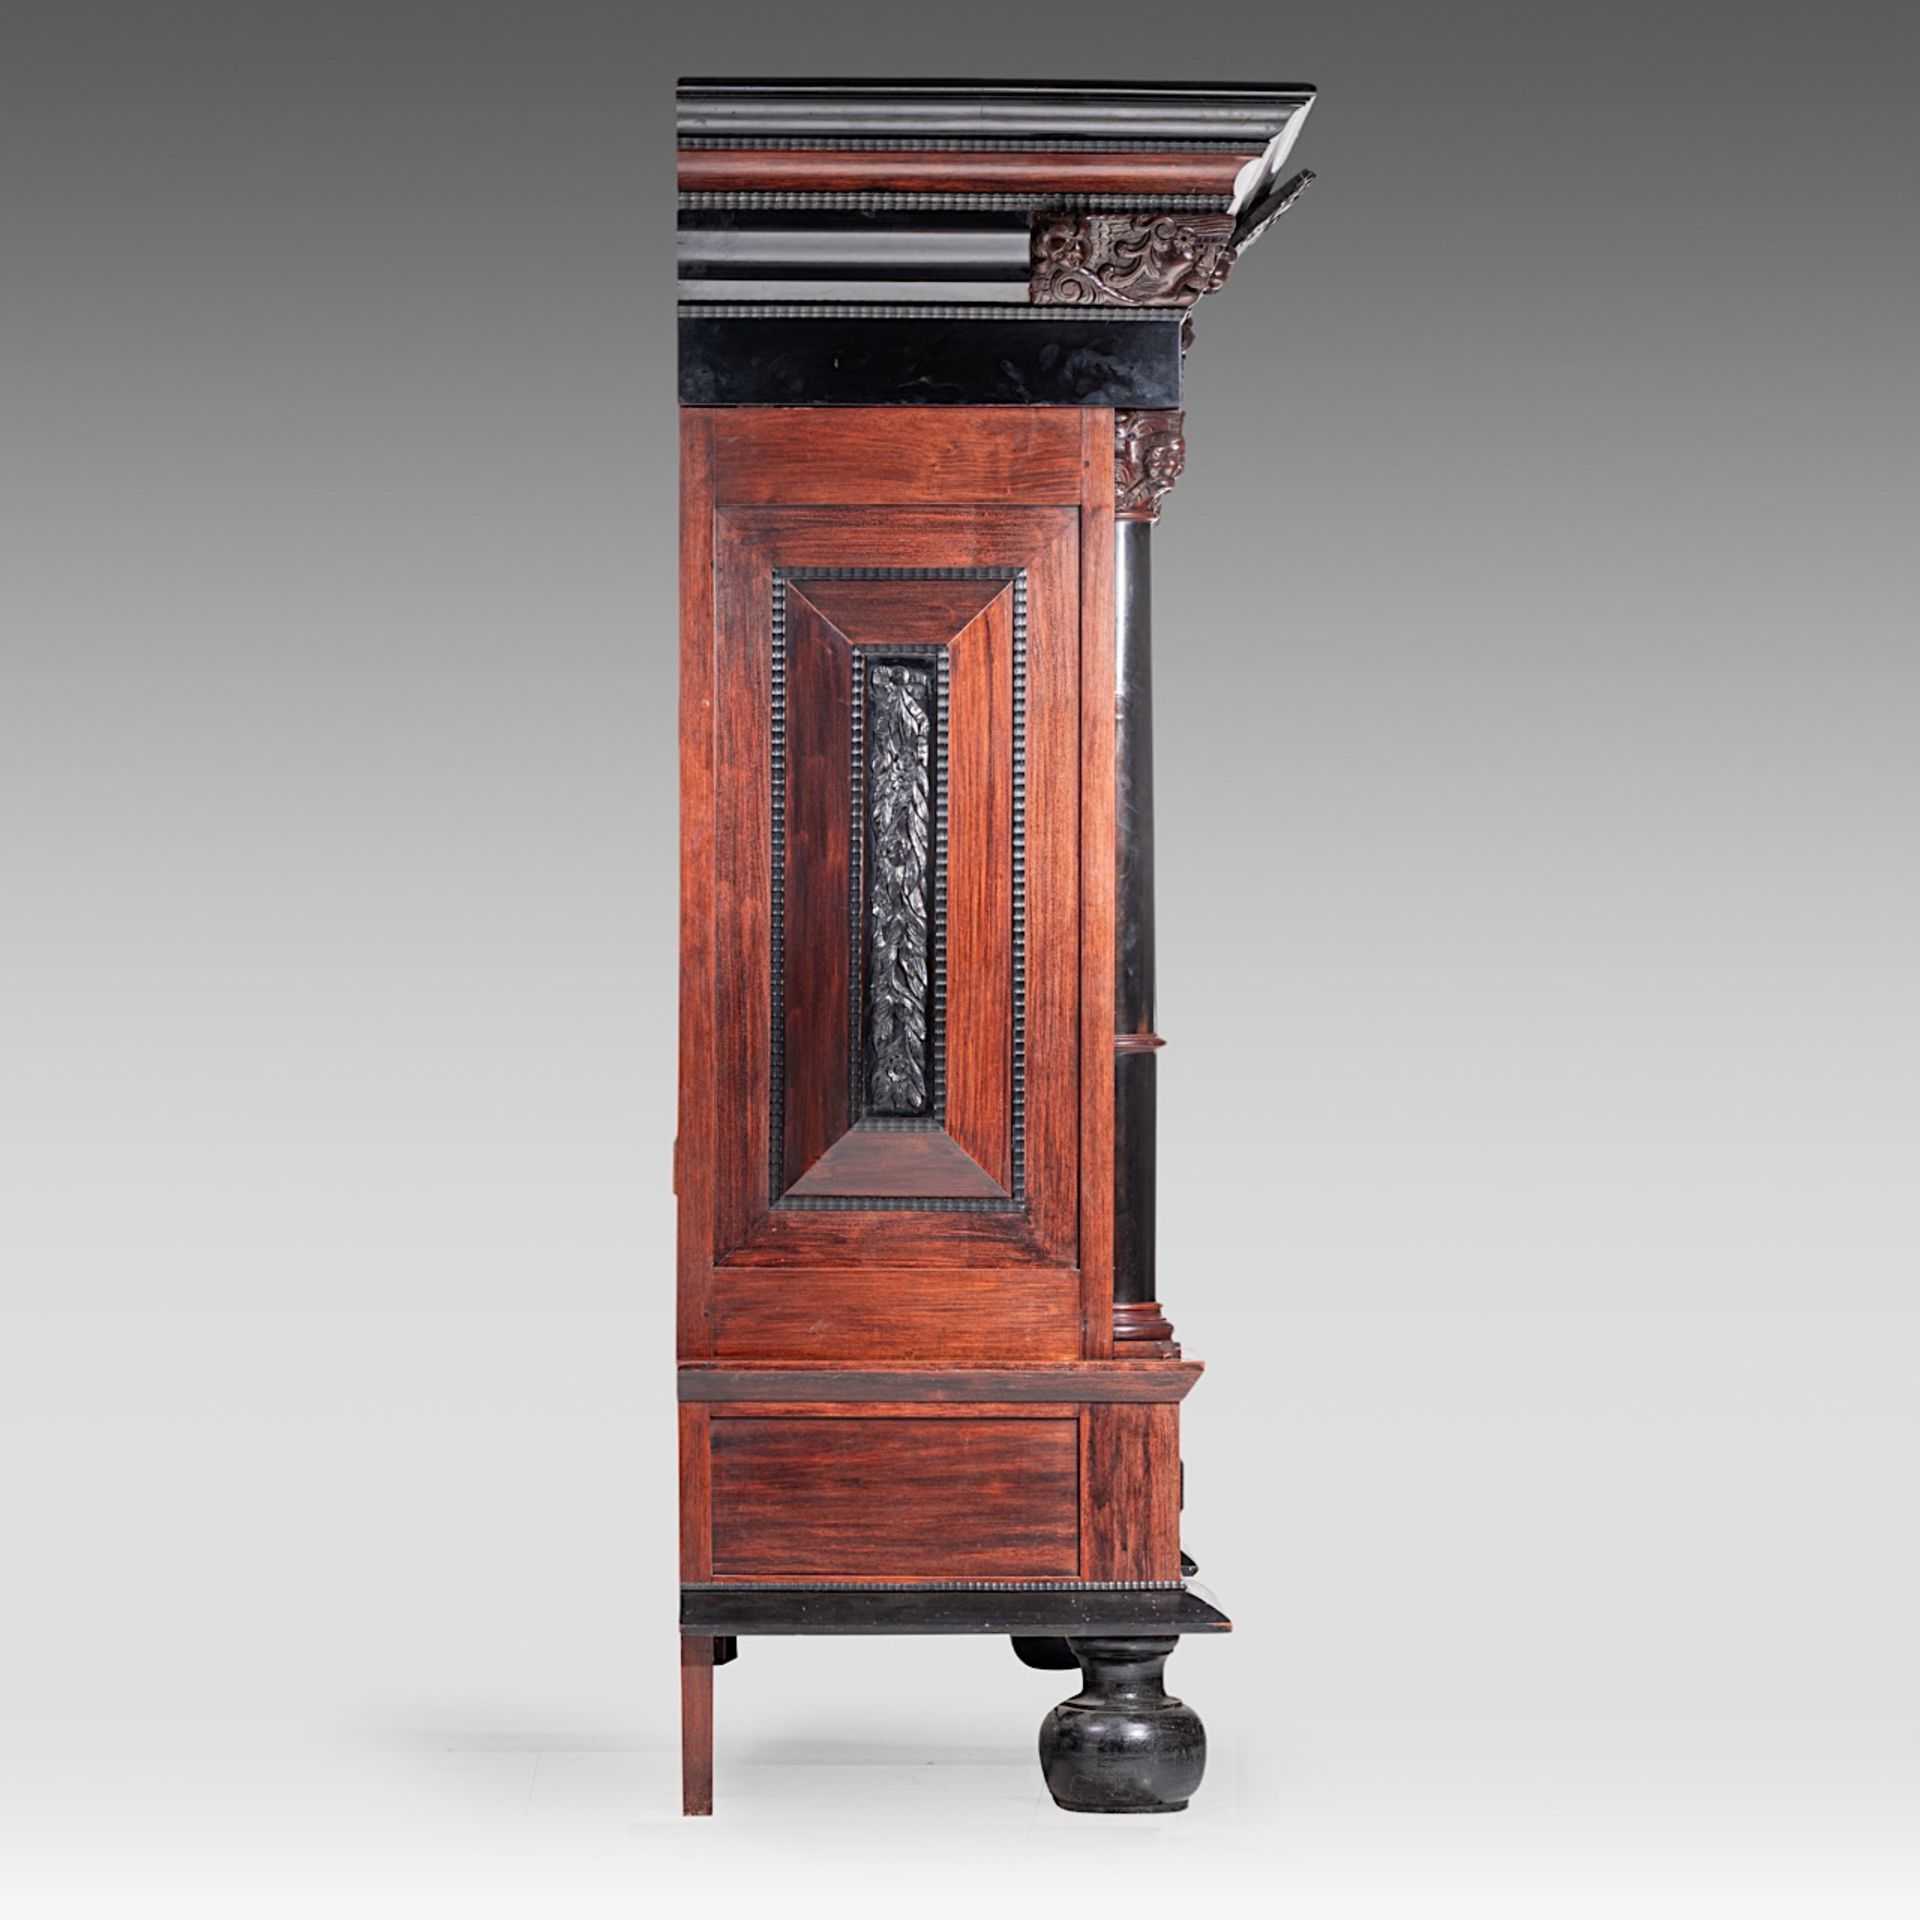 A large Baroque style rosewood and ebony cupboard, H 235 - W 200 - D 85 cm - Bild 5 aus 6